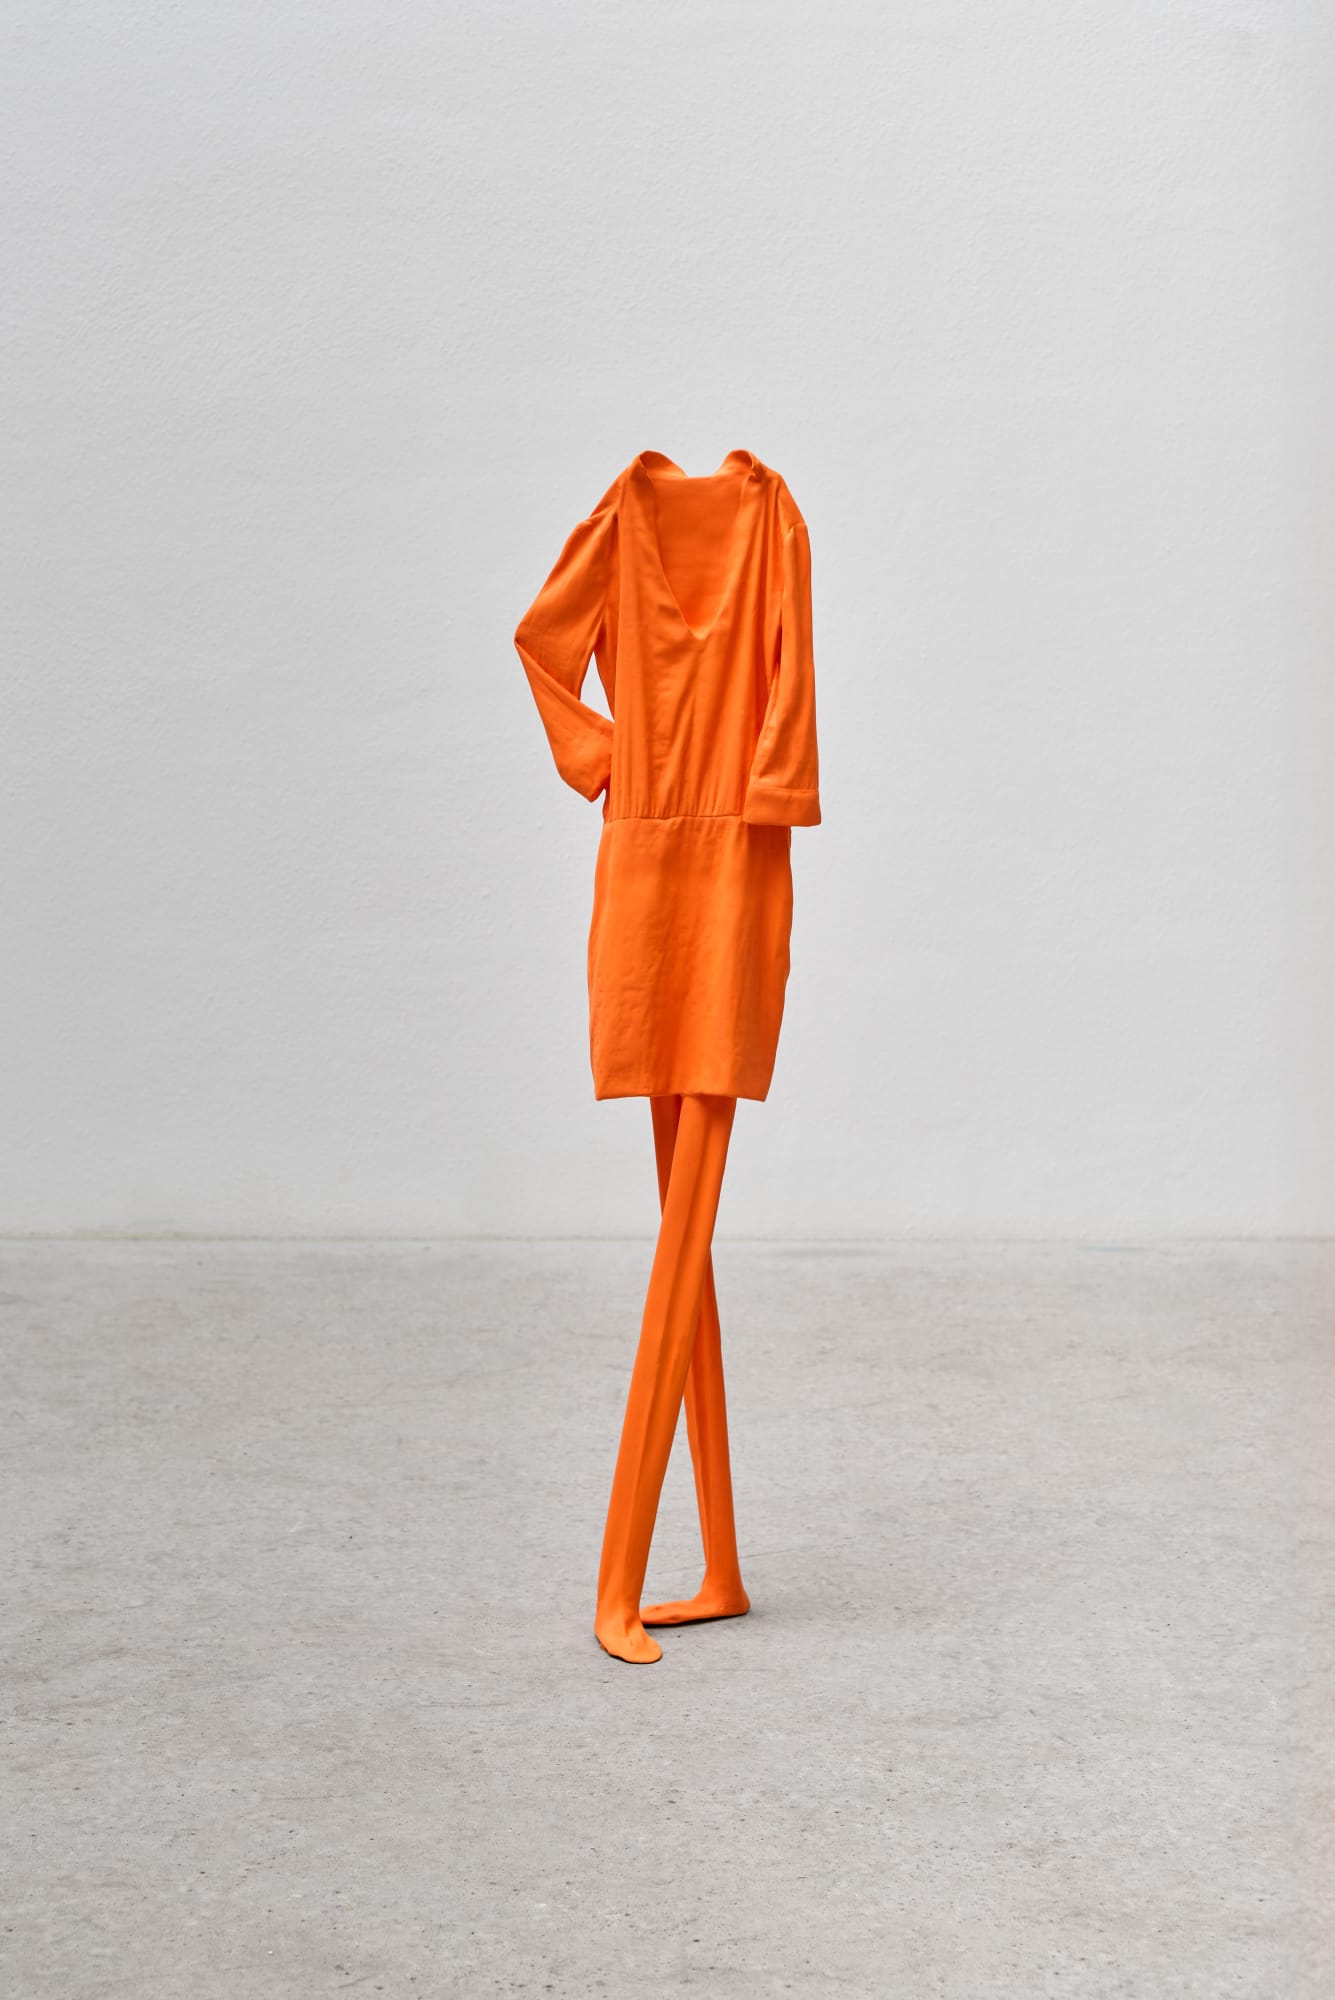 Erwin Wurm's 'Surrogates' in London The artist’s latest exhibition at Thaddaeus Ropac in London, makes visitors look twice